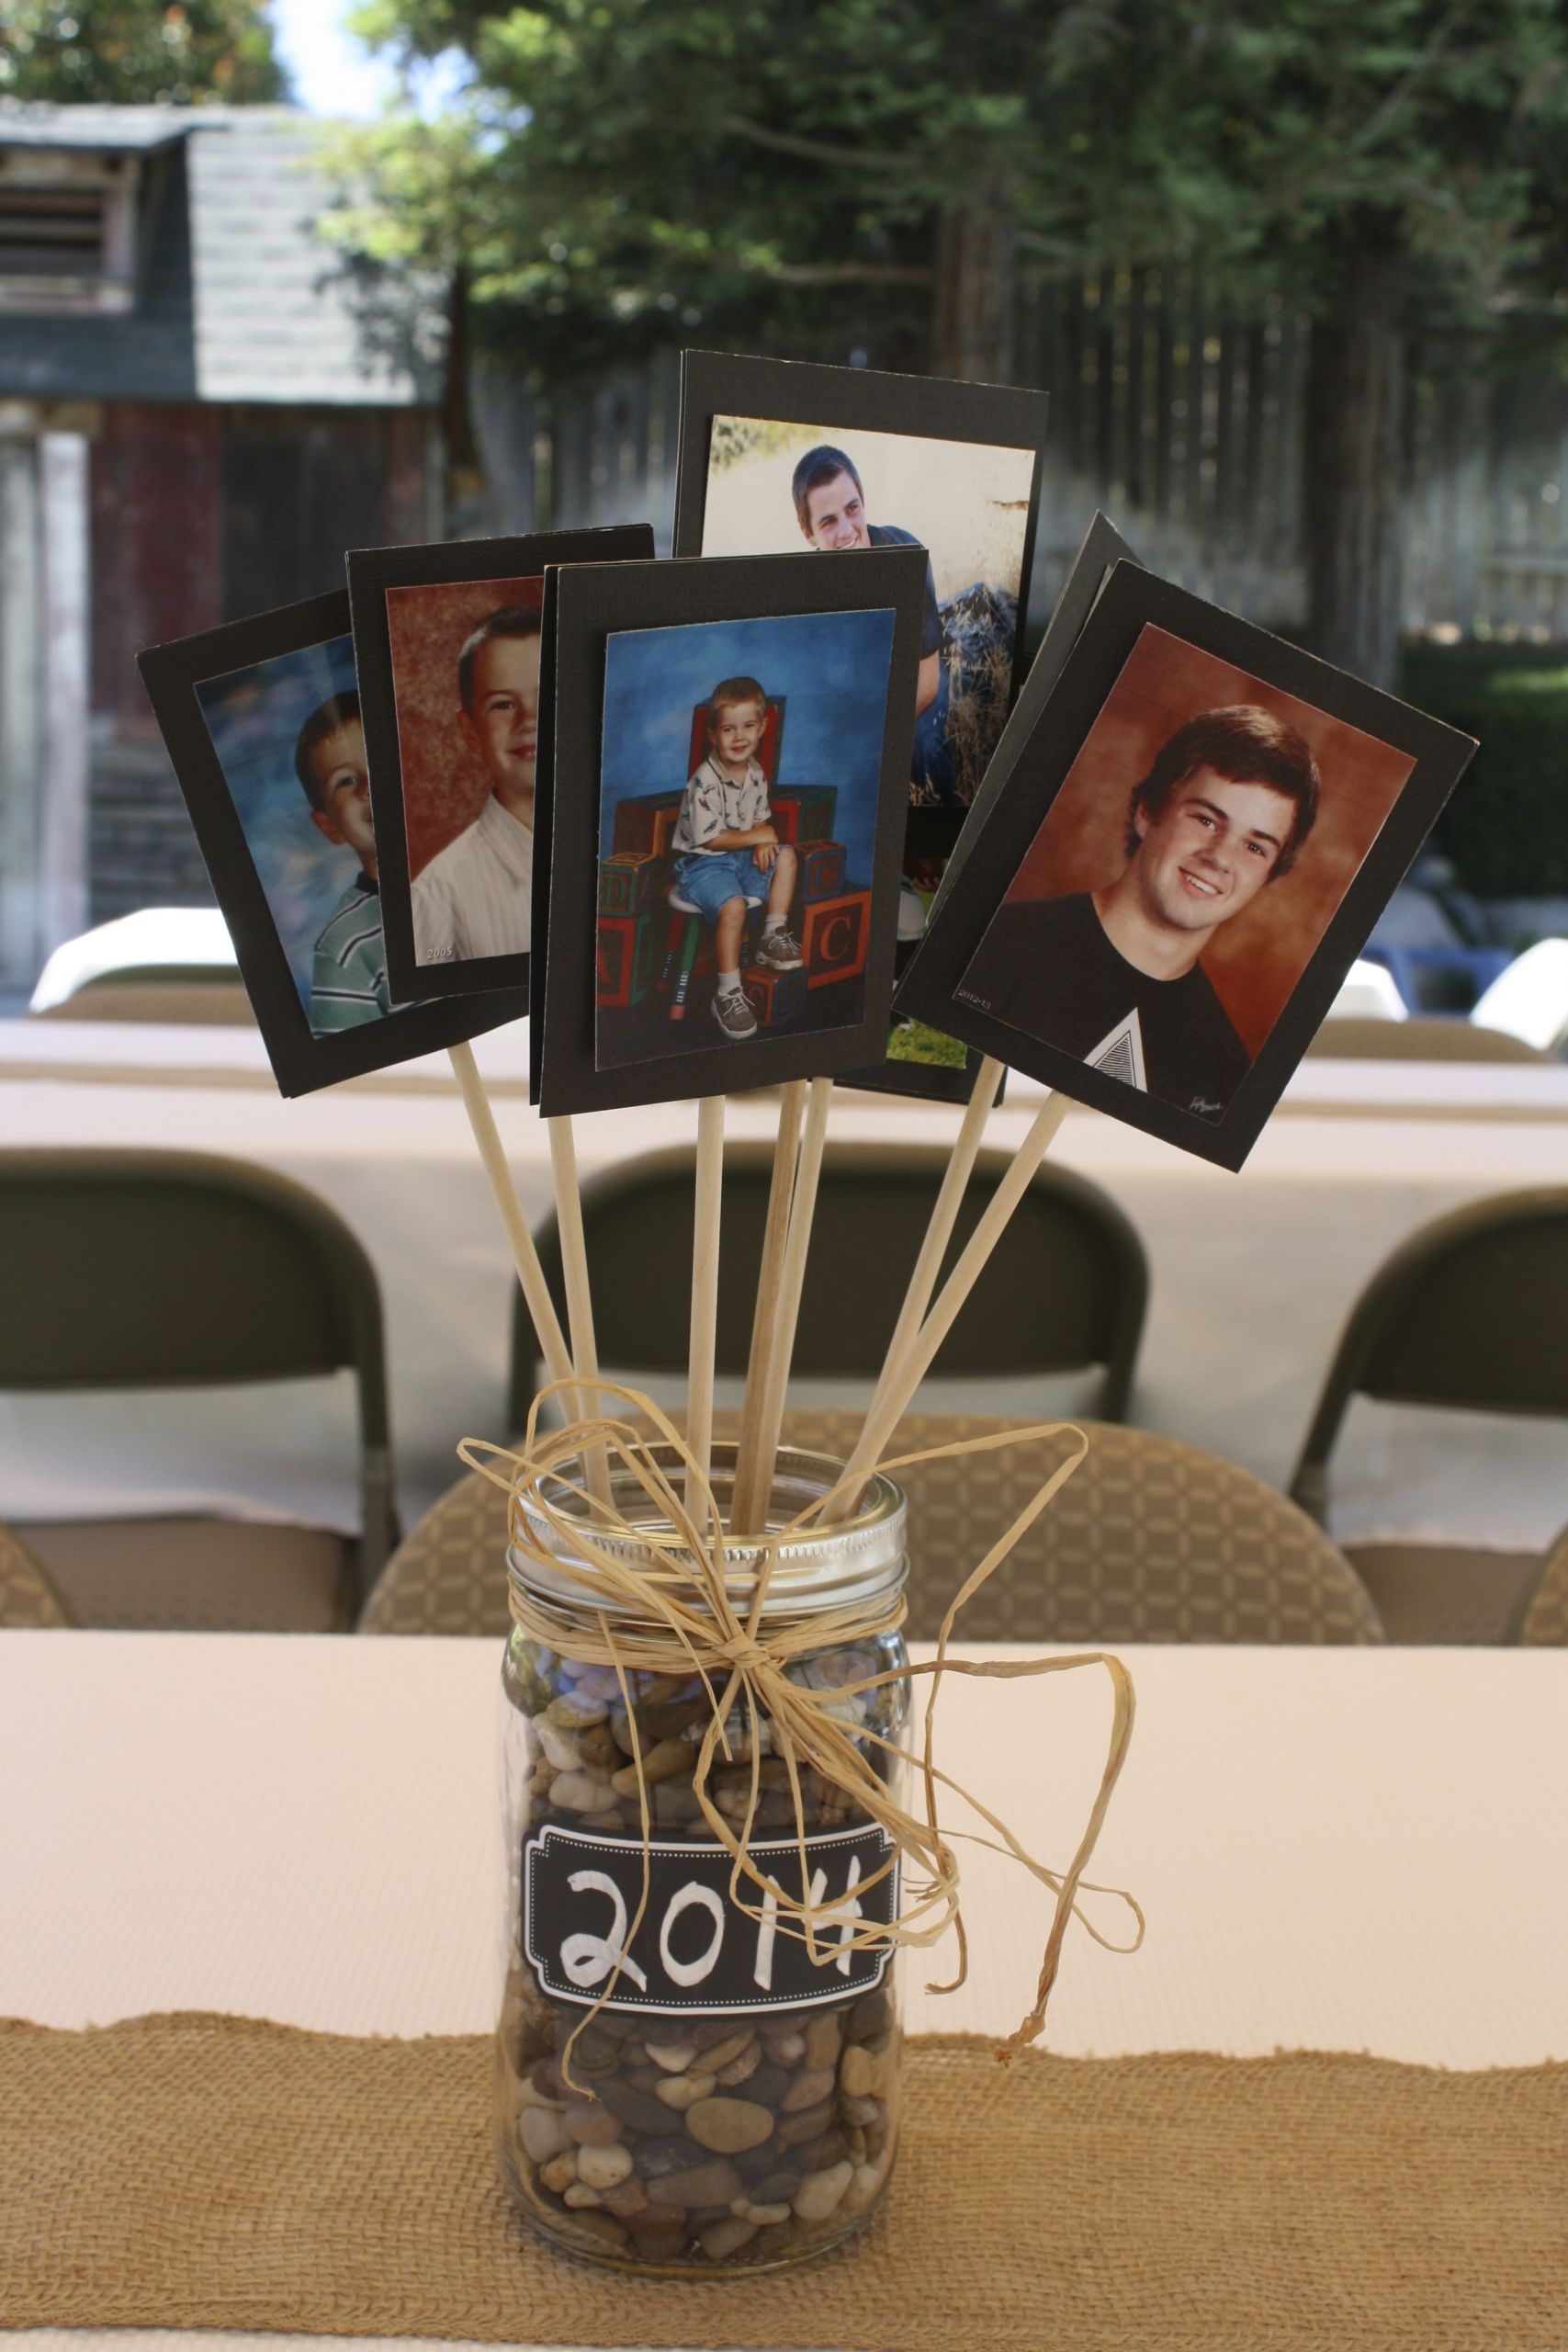 Table Decoration Ideas For High School Graduation Party
 Centerpiece for tables at a graduation party Good for